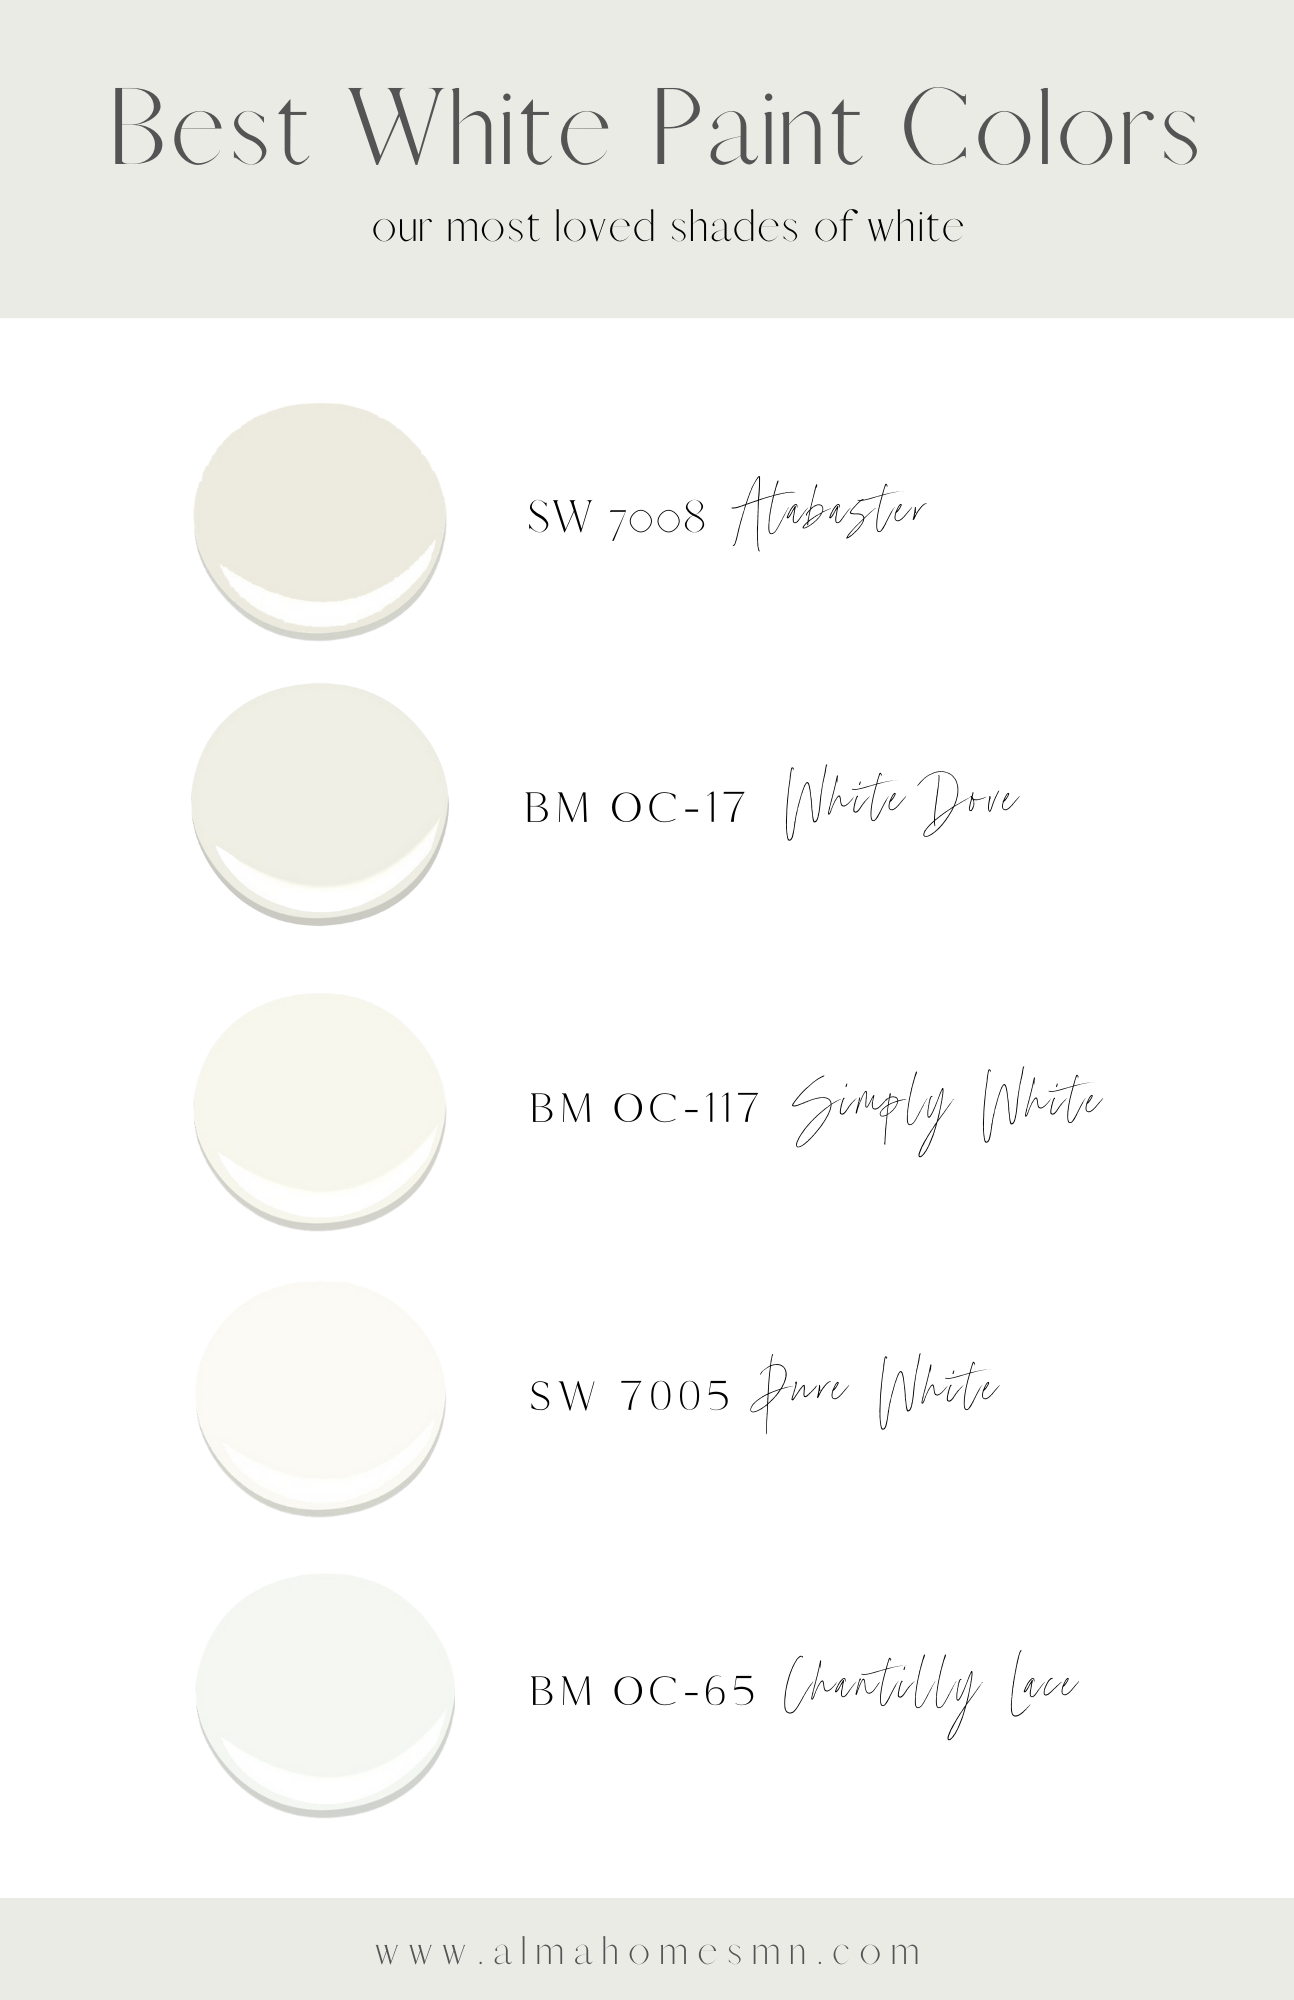 10 Best White Paint Colors by Sherwin-Williams